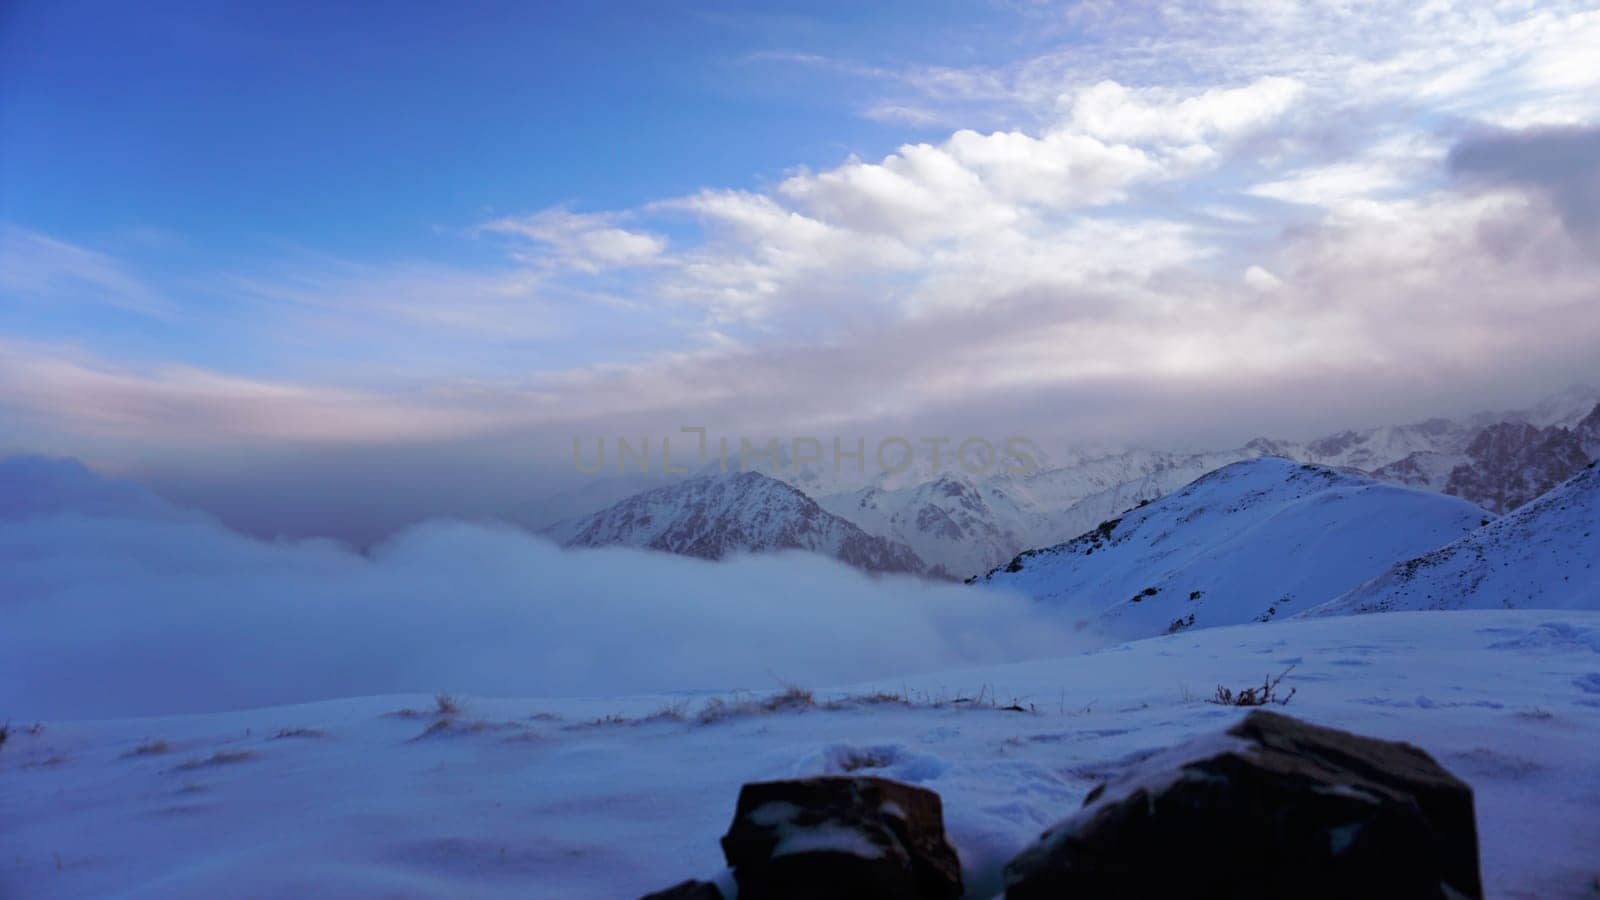 Ocean of clouds in snowy mountains at dawn by Passcal